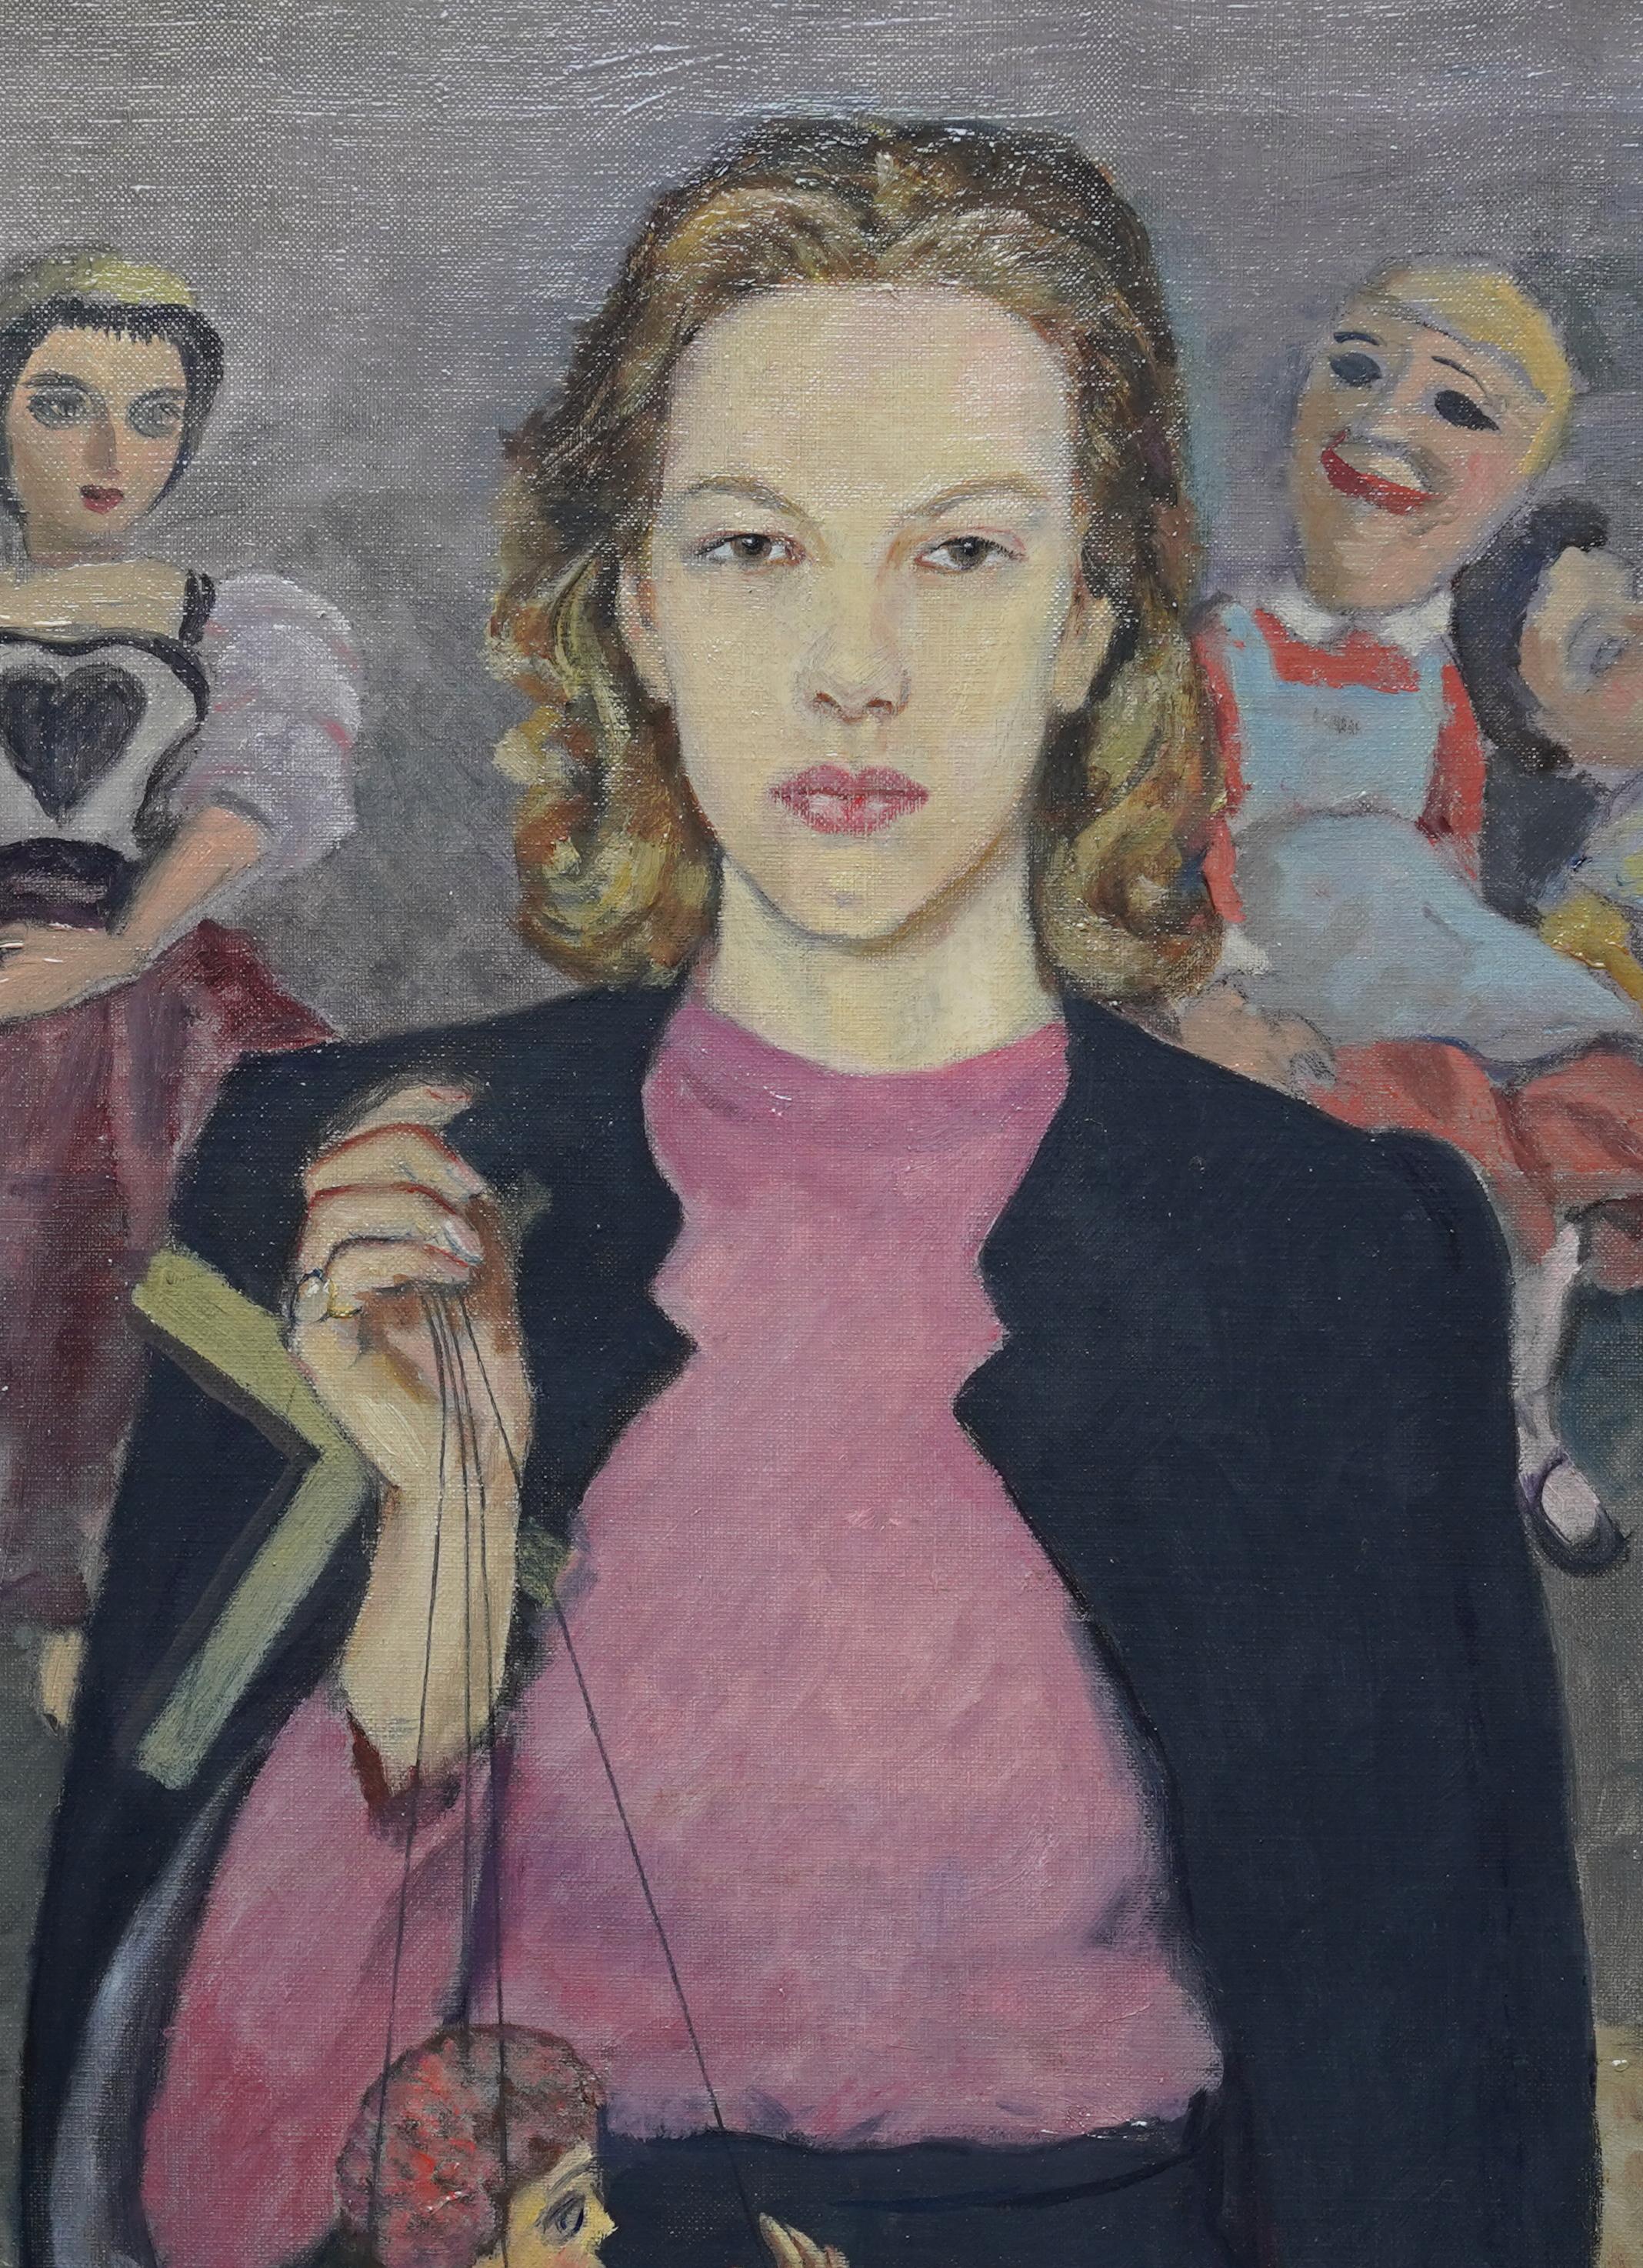 This superb Royal Academy exhibited portrait oil painting is by British artist James Cleaver ARCA. It was painted in 1937 and exhibited at the Royal Academy in 1939 entitled 'Caroline and her Puppets'. It is a three-quarter length portrait of a